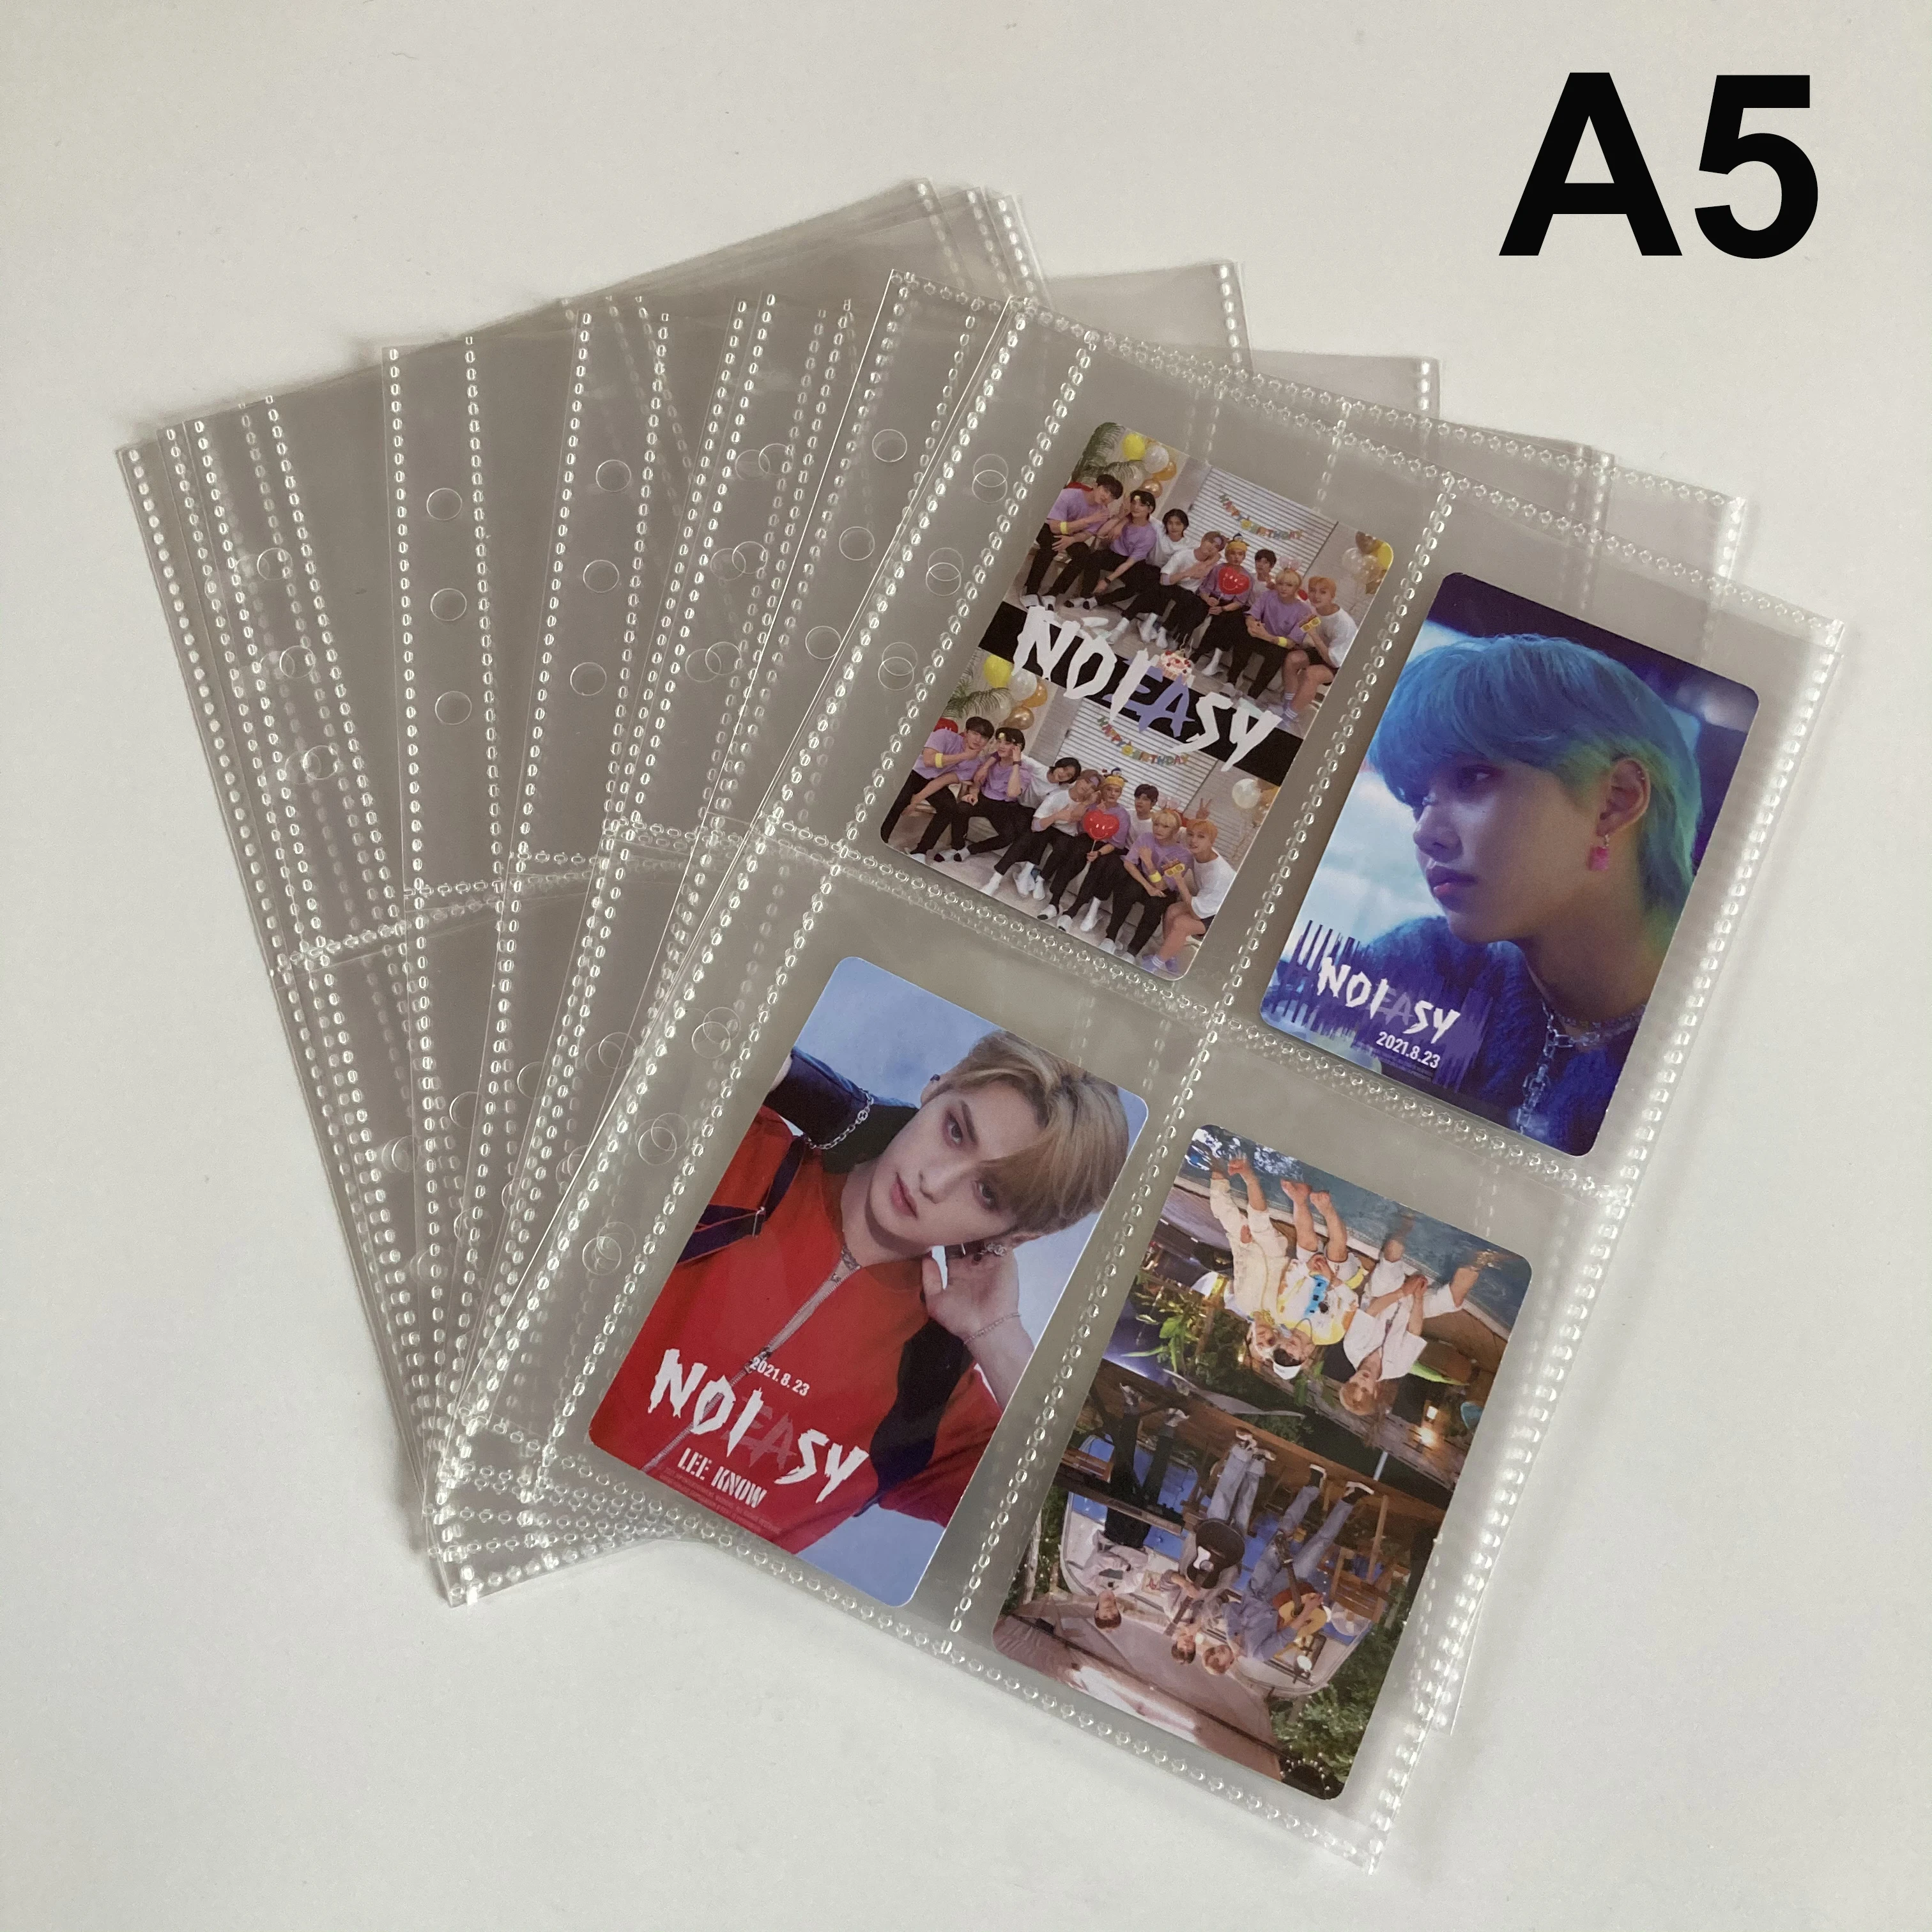 A5 Binder Sleeves Double Sided 1 2 4 Pockets Clear Kpop Photocard Postcard Trading Card Photo Album Sleeves Refill Page PVC Free 20 30pcs self adhesive index card pockets clear plastic library label holder with top open sticky pocket sleeves for note cards